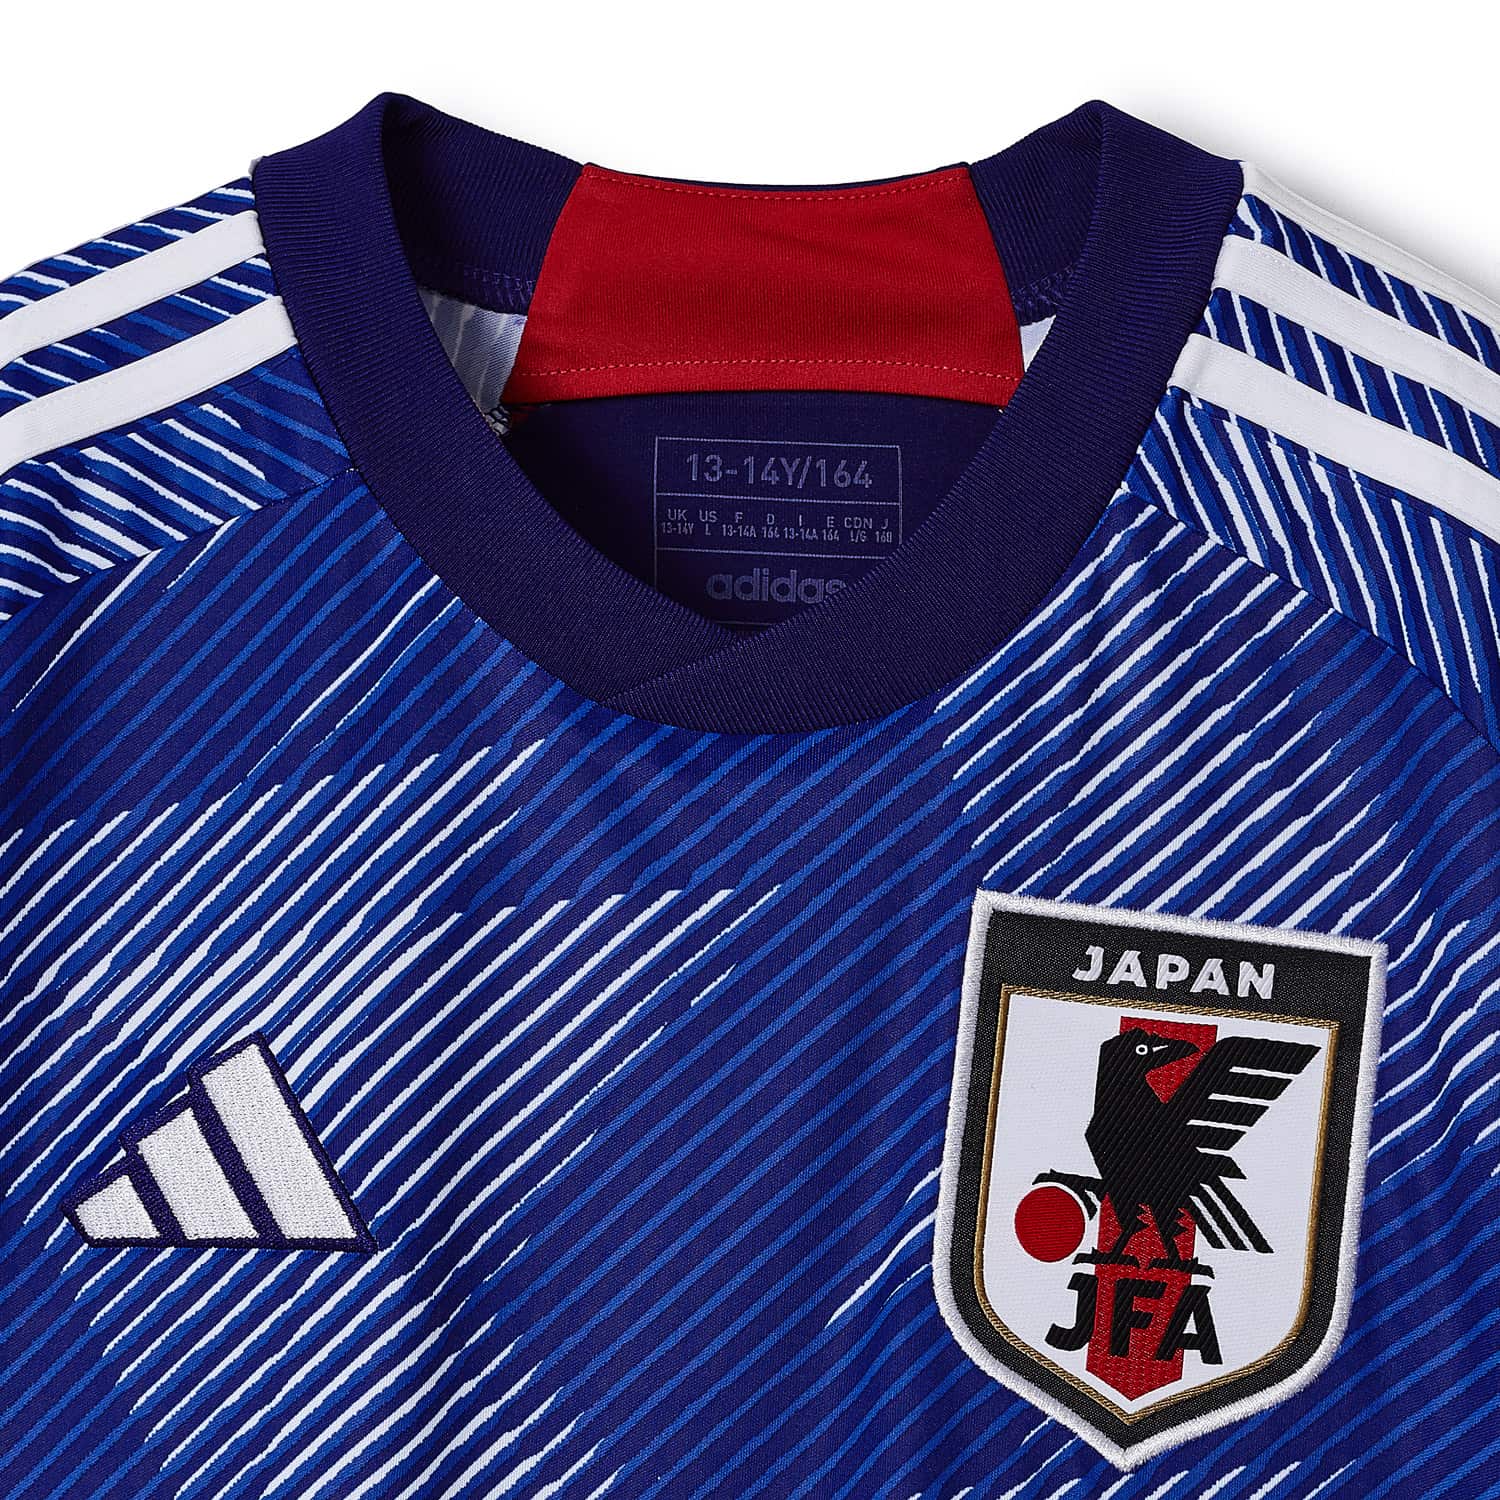 japan's world cup kit